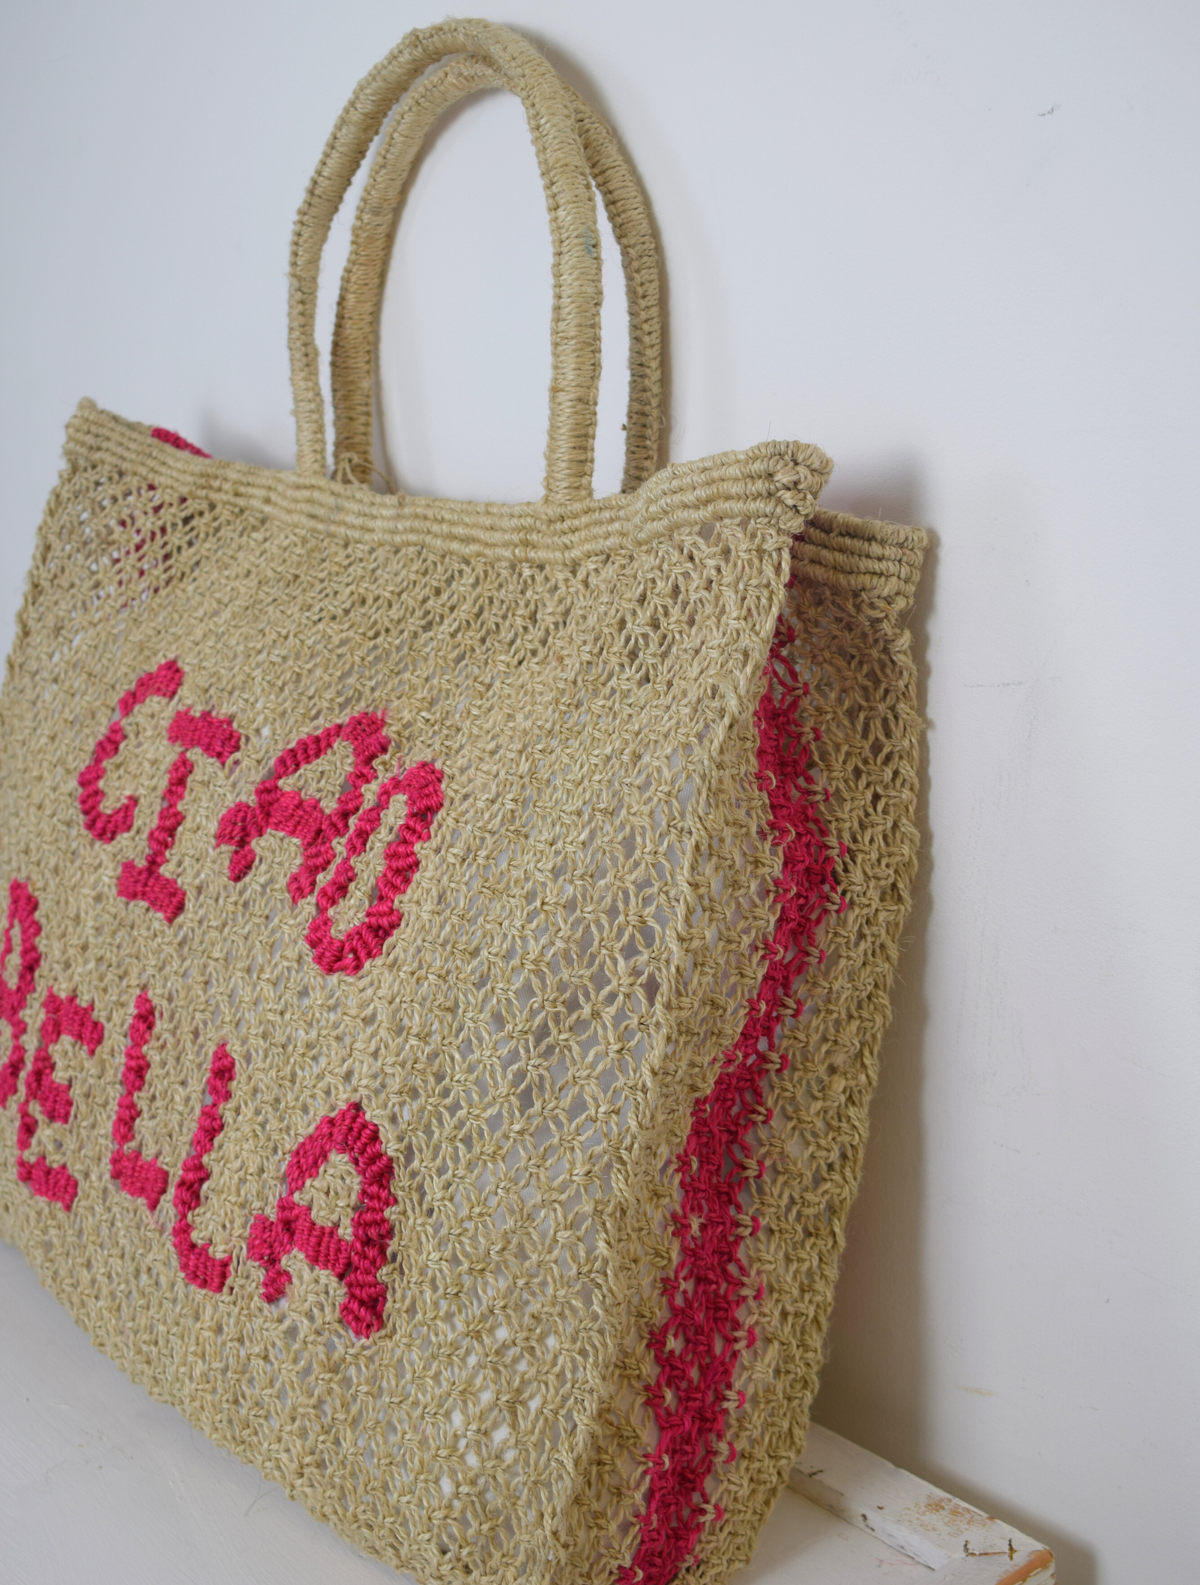 Woven Bag with pink writing saying Ciao Bella on the front